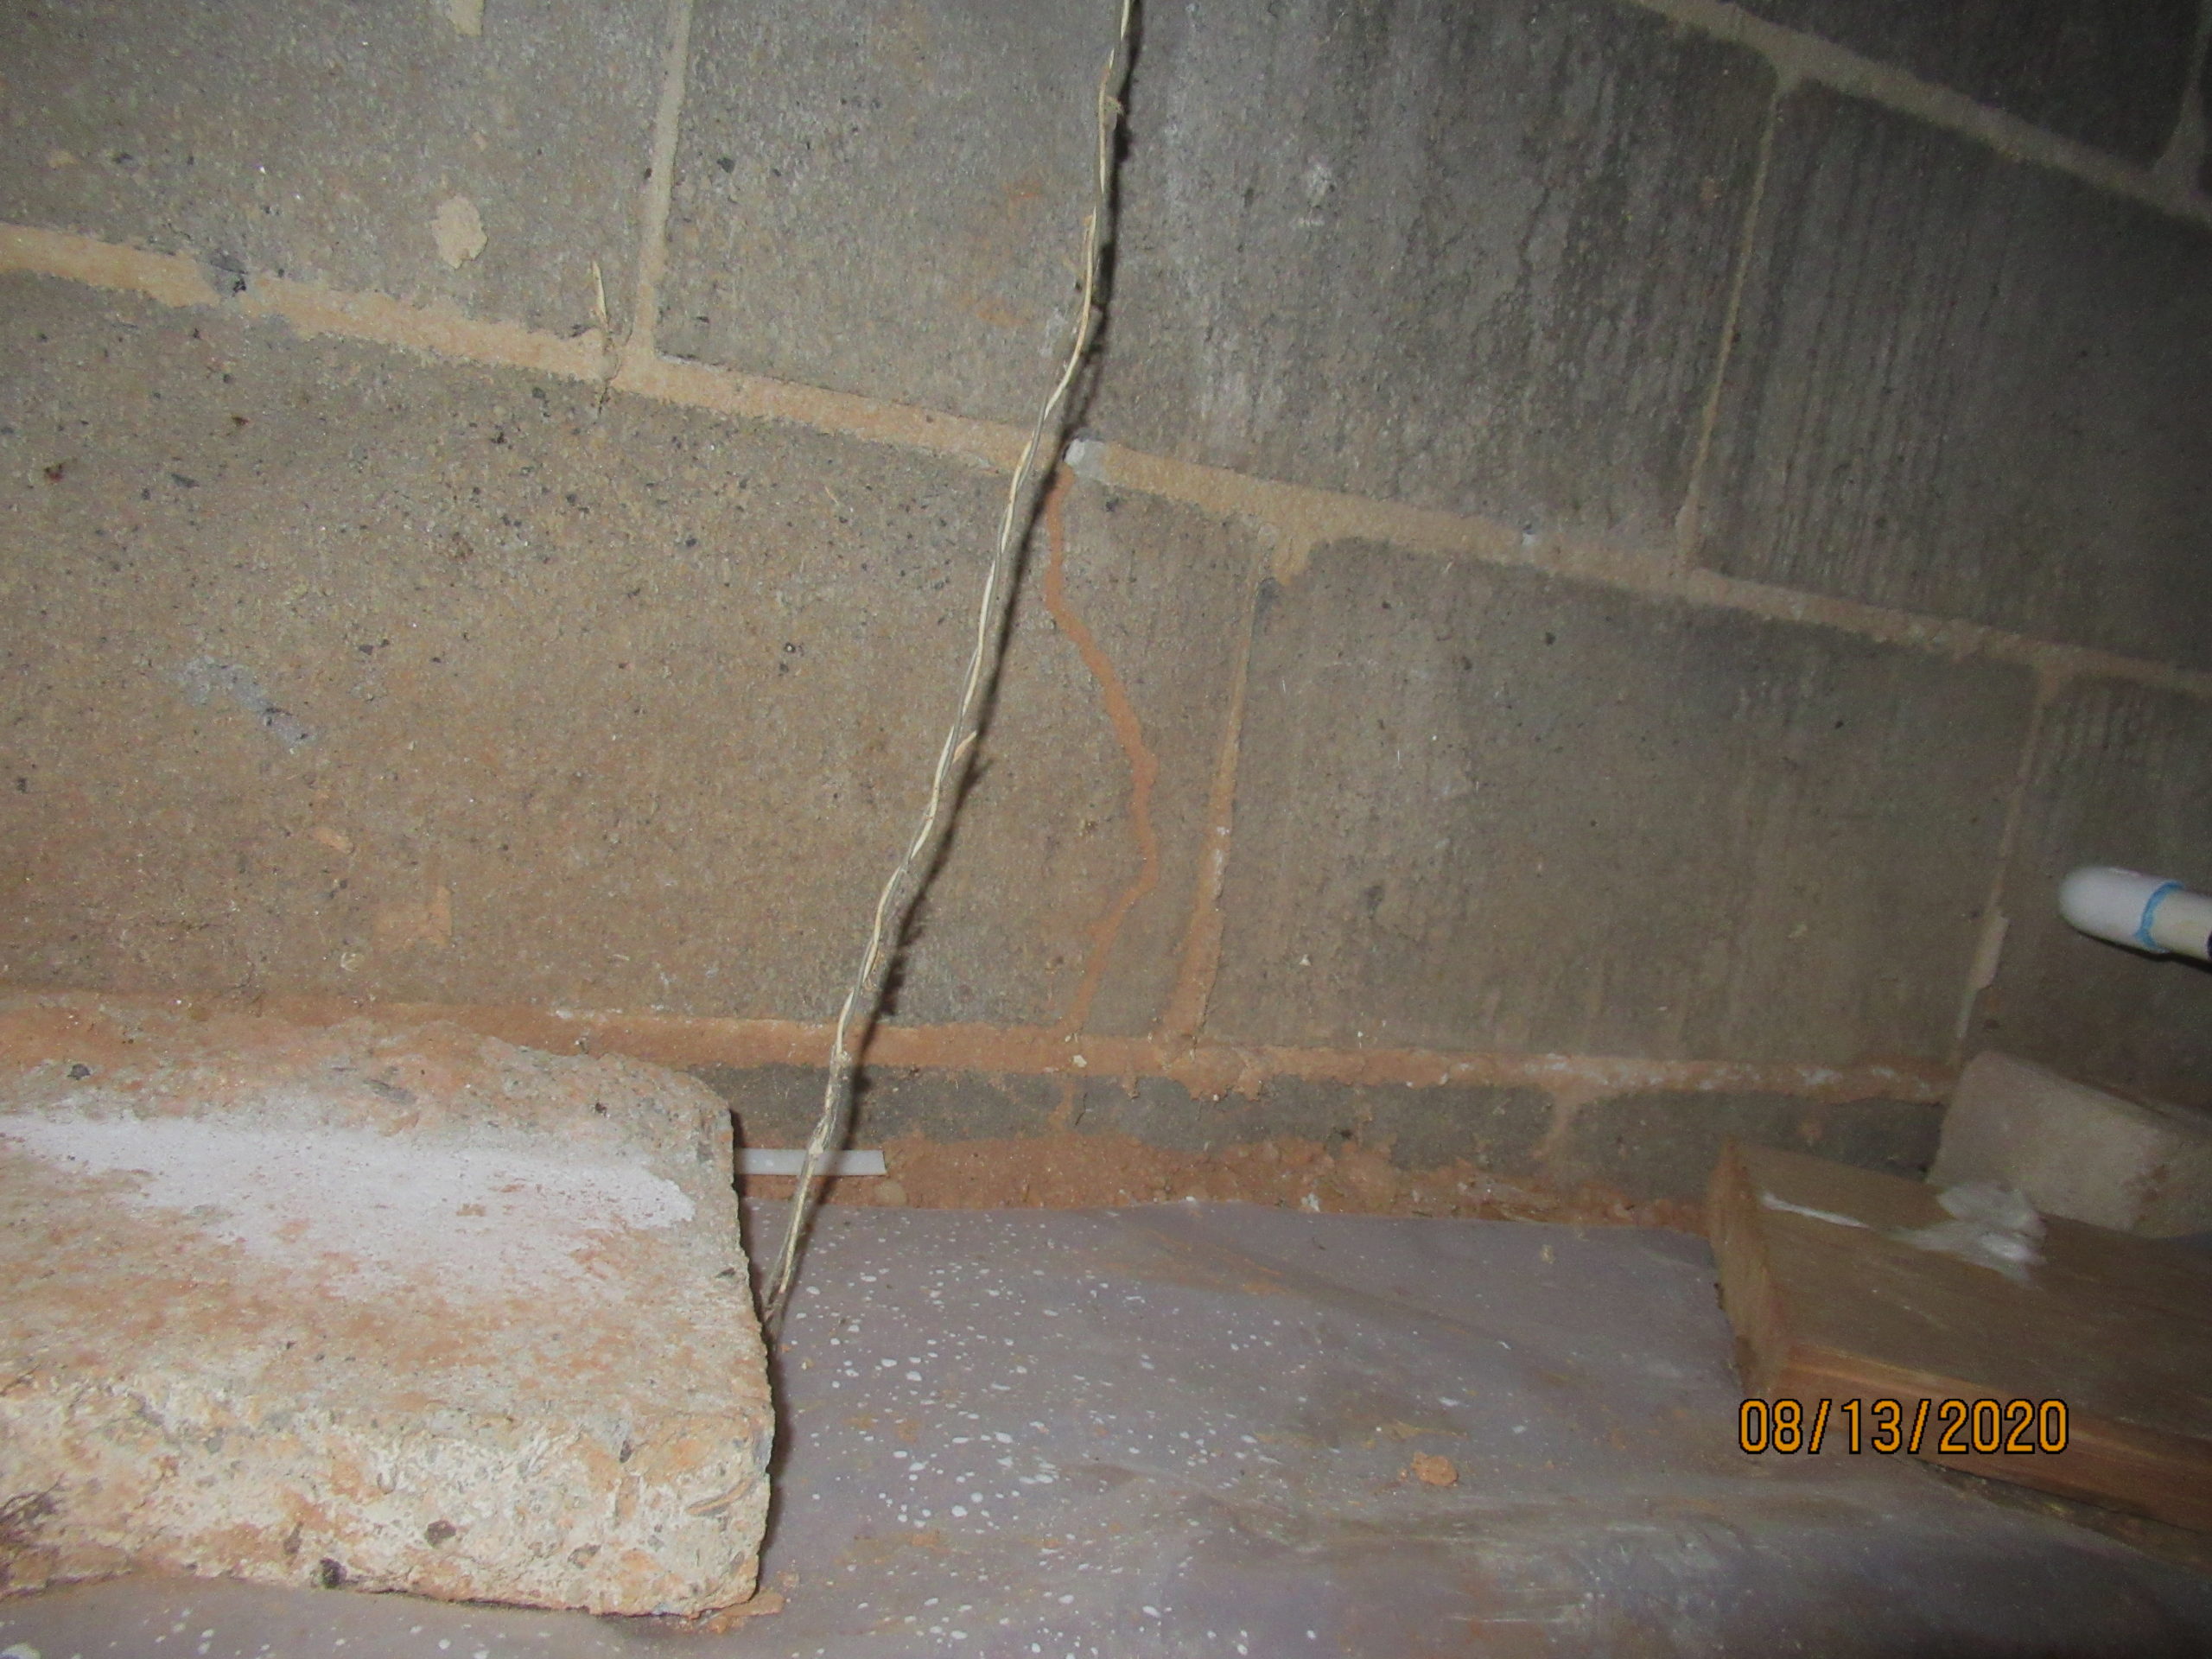 Termite tunnels in foundation wall